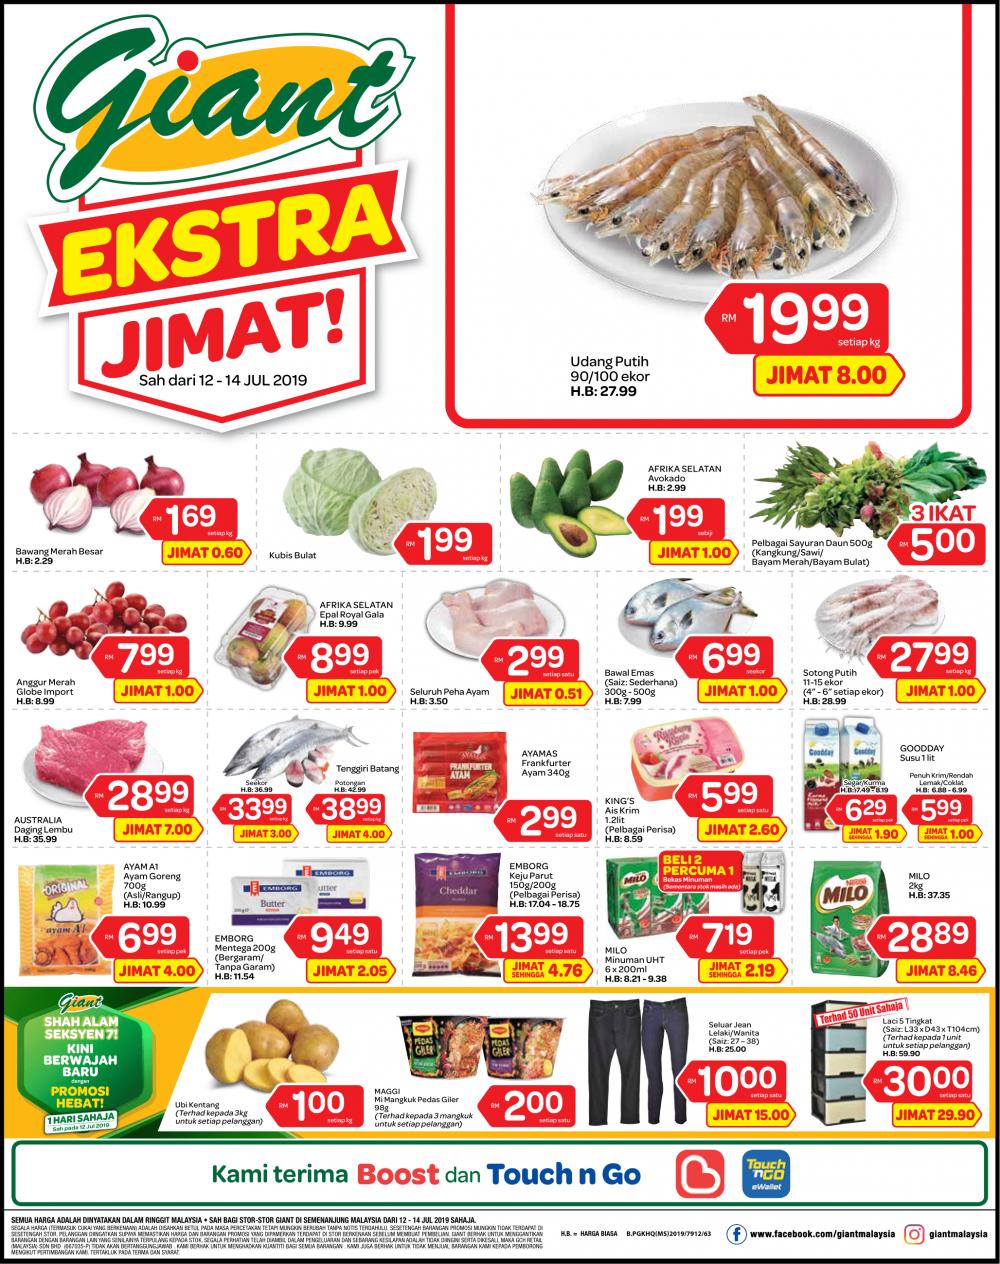 Giant Fresh Items Promotion (12 July 2019 - 14 July 2019)